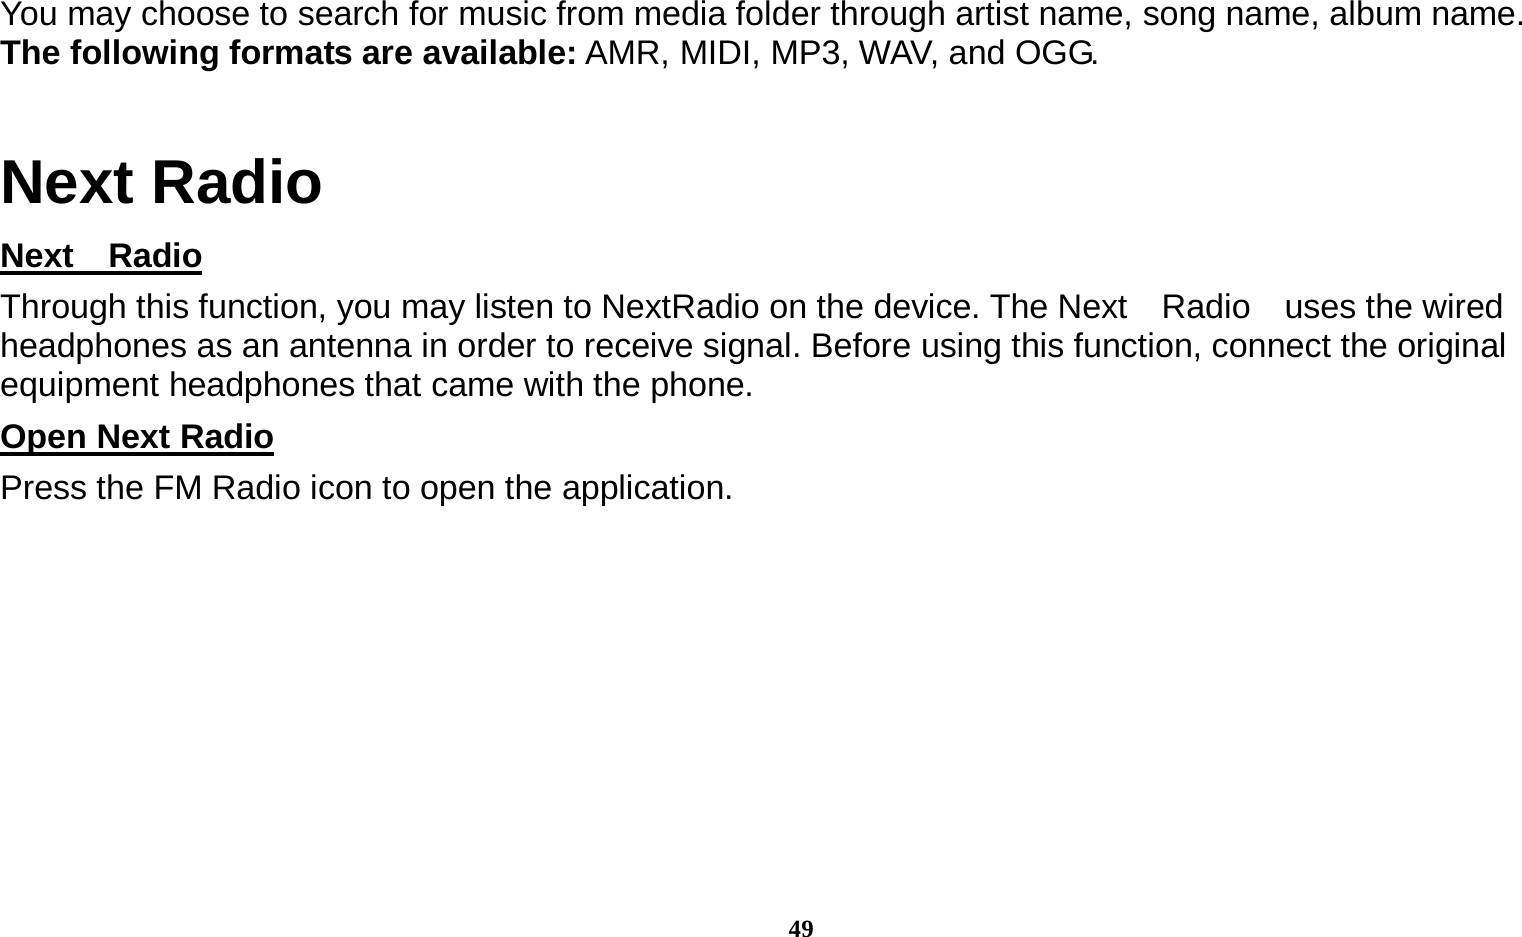  49 You may choose to search for music from media folder through artist name, song name, album name.     The following formats are available: AMR, MIDI, MP3, WAV, and OGG. Next Radio Next  Radio                                                                                       Through this function, you may listen to NextRadio on the device. The Next    Radio    uses the wired headphones as an antenna in order to receive signal. Before using this function, connect the original equipment headphones that came with the phone. Open Next Radio                                                                                   Press the FM Radio icon to open the application. 